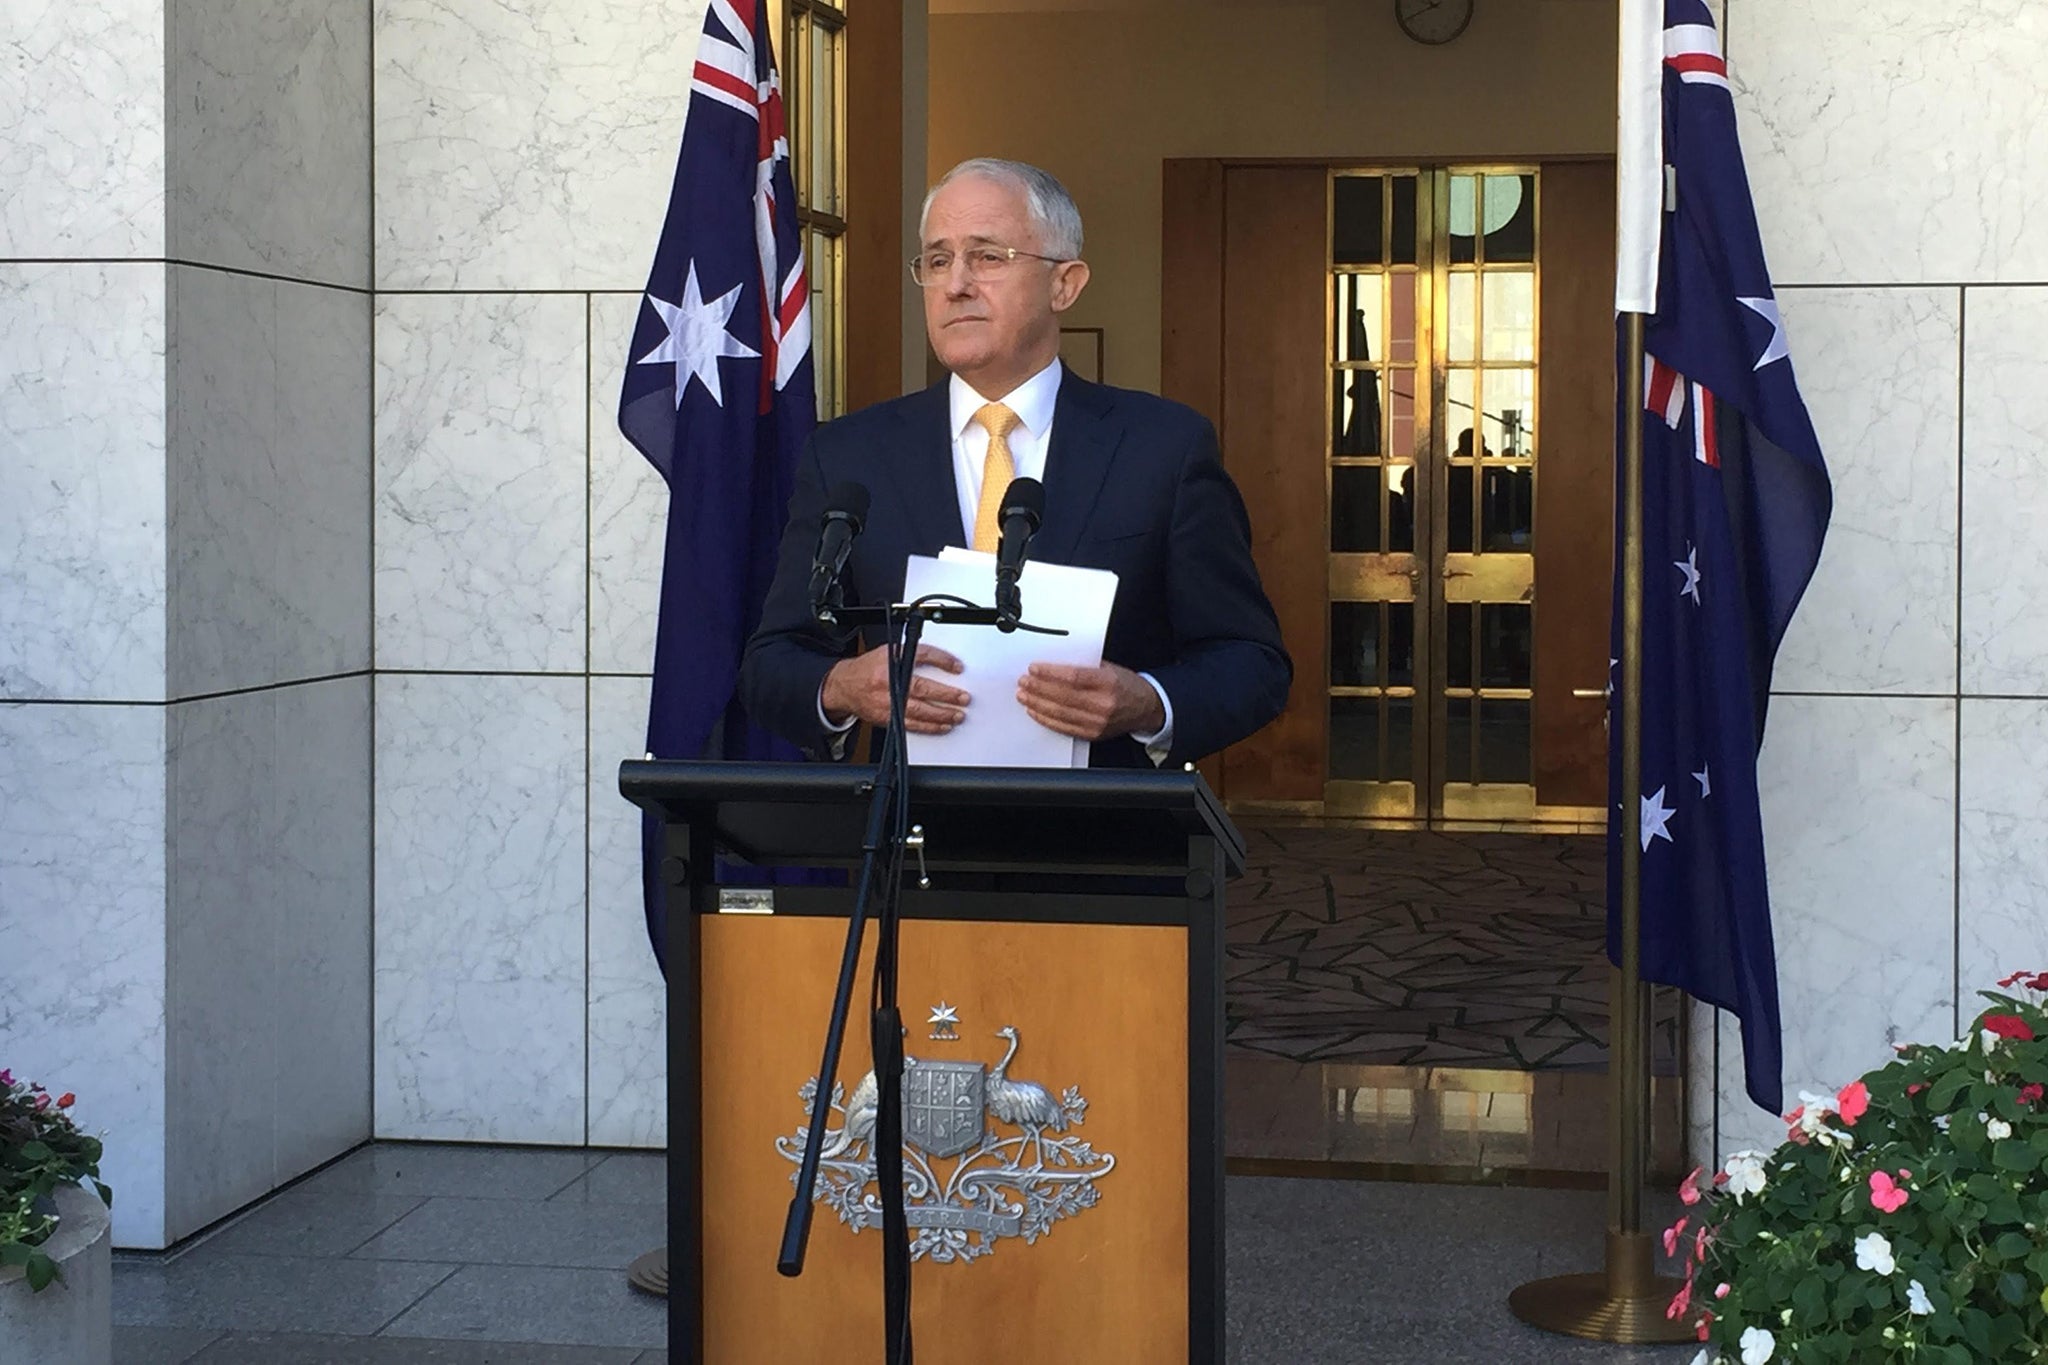 Australia's Prime Minister, Malcolm Turnbull speaking to the media at Parliament House in Canberra